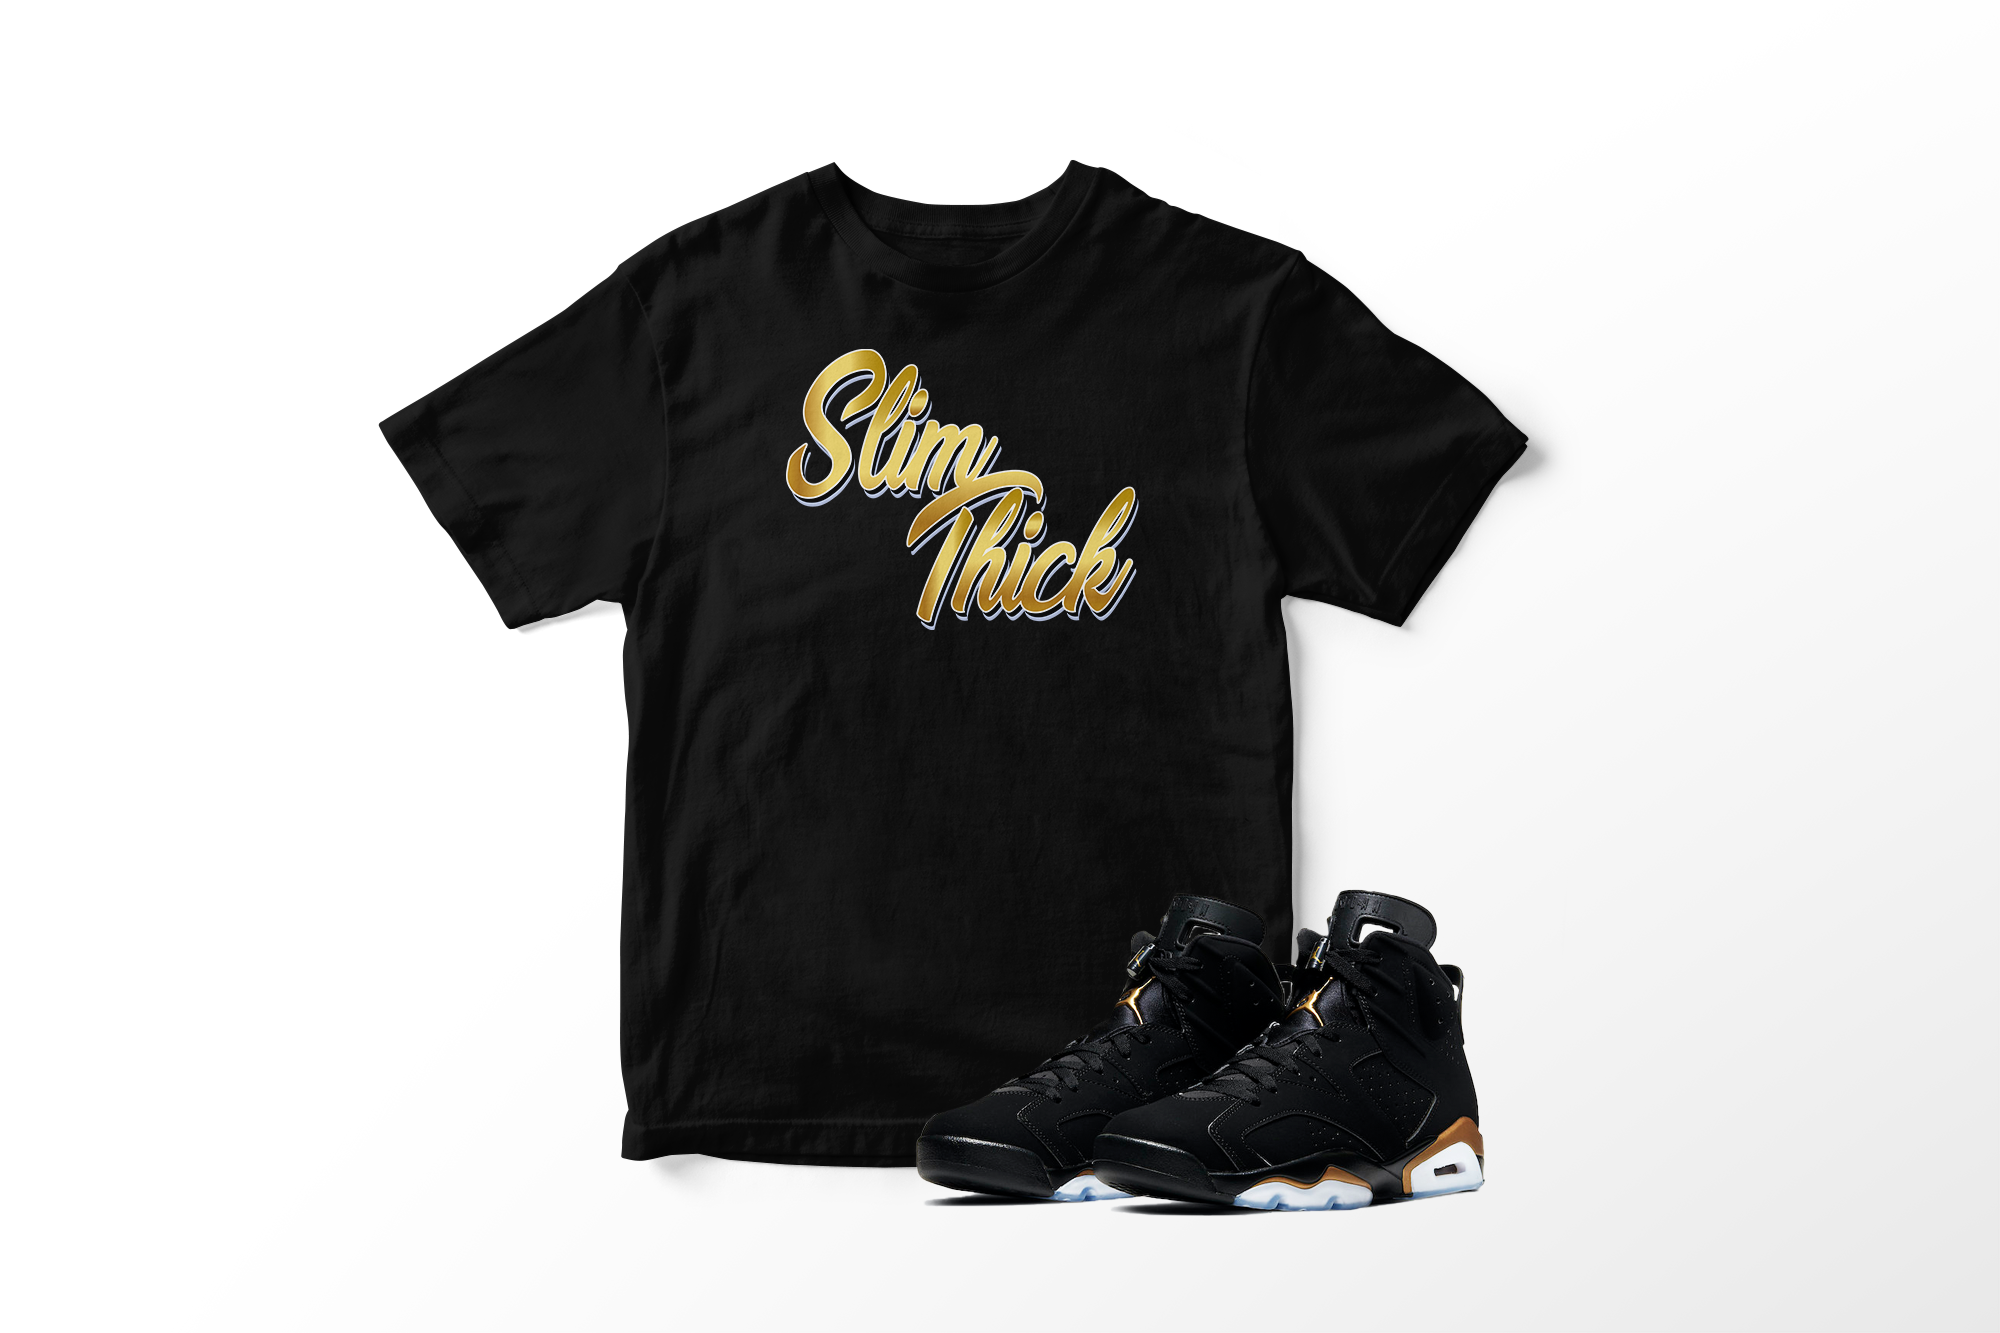 'Slim Thick' in DMP CW Short Sleeve Tee